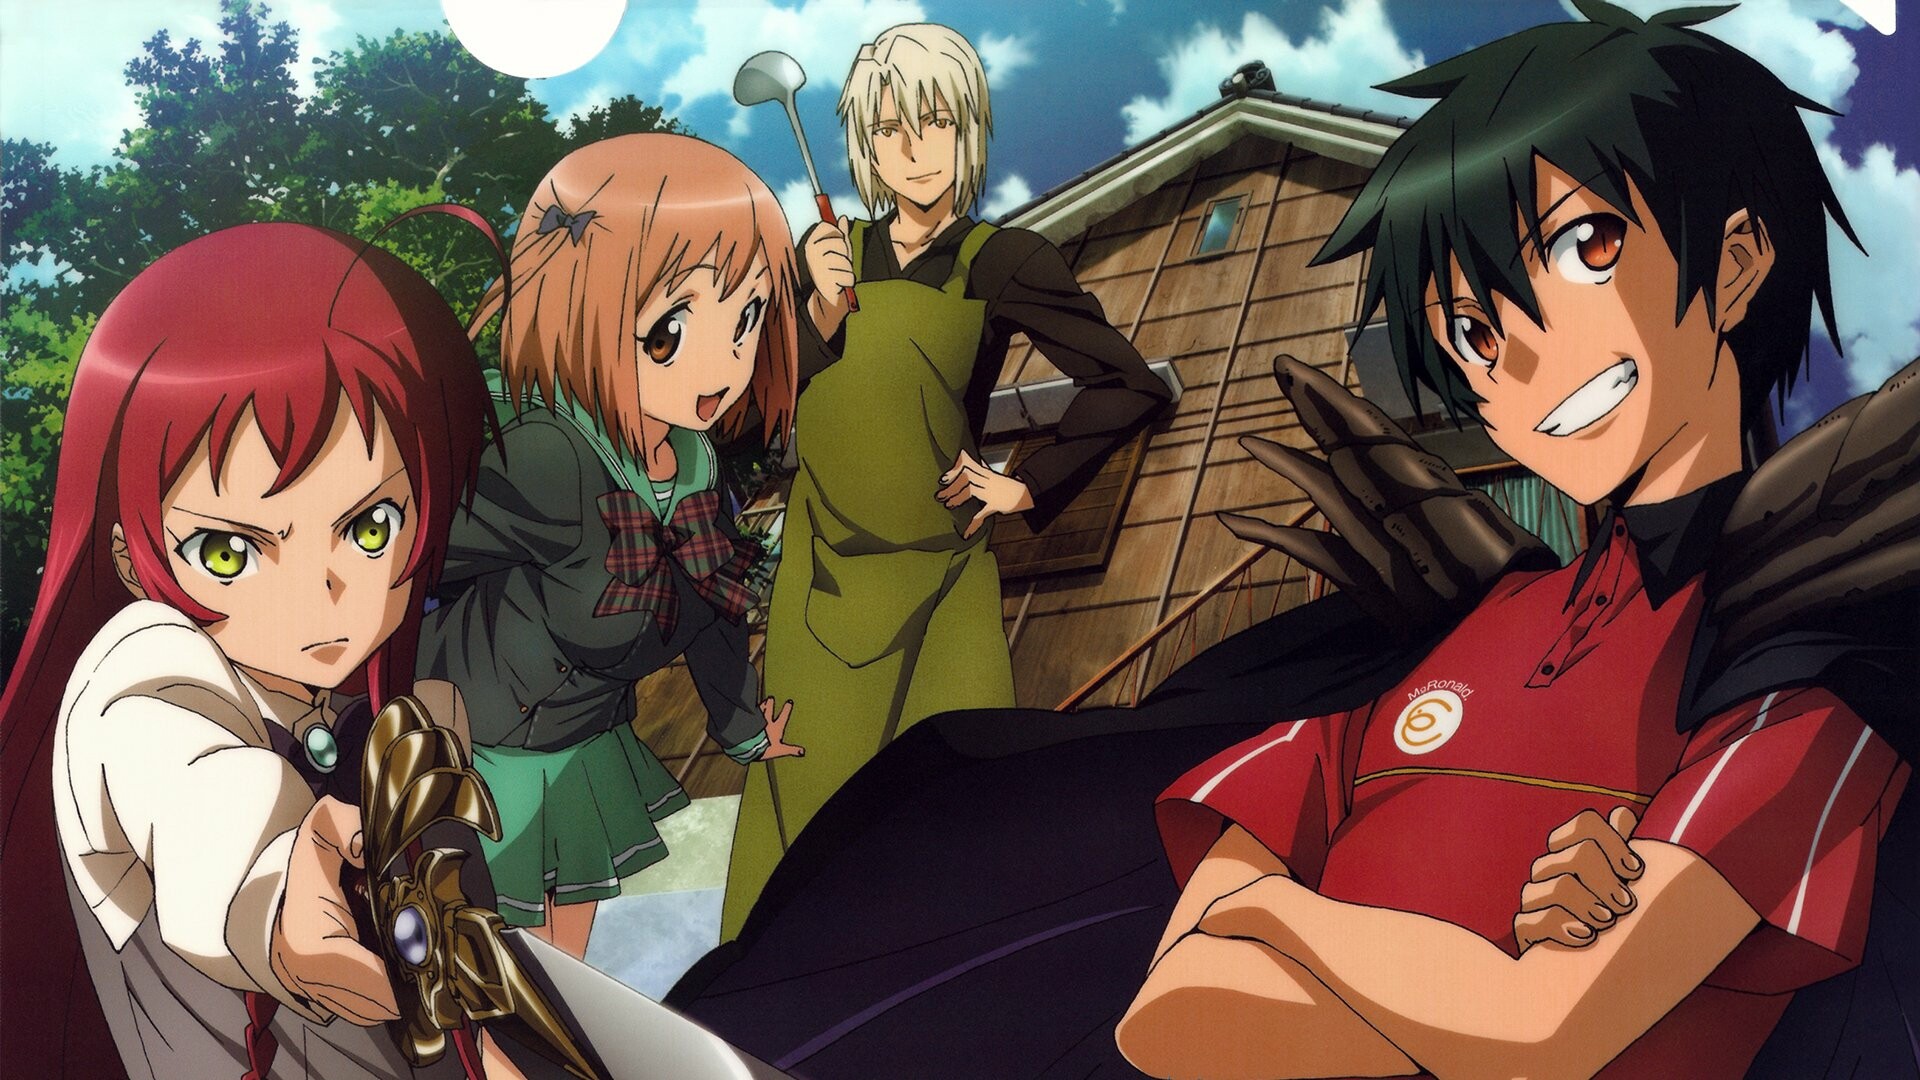 The Devil Is a Part-Timer!: A second season was announced at the Kadokawa Light Novel Expo 2020 event on March 6, 2021. 1920x1080 Full HD Background.